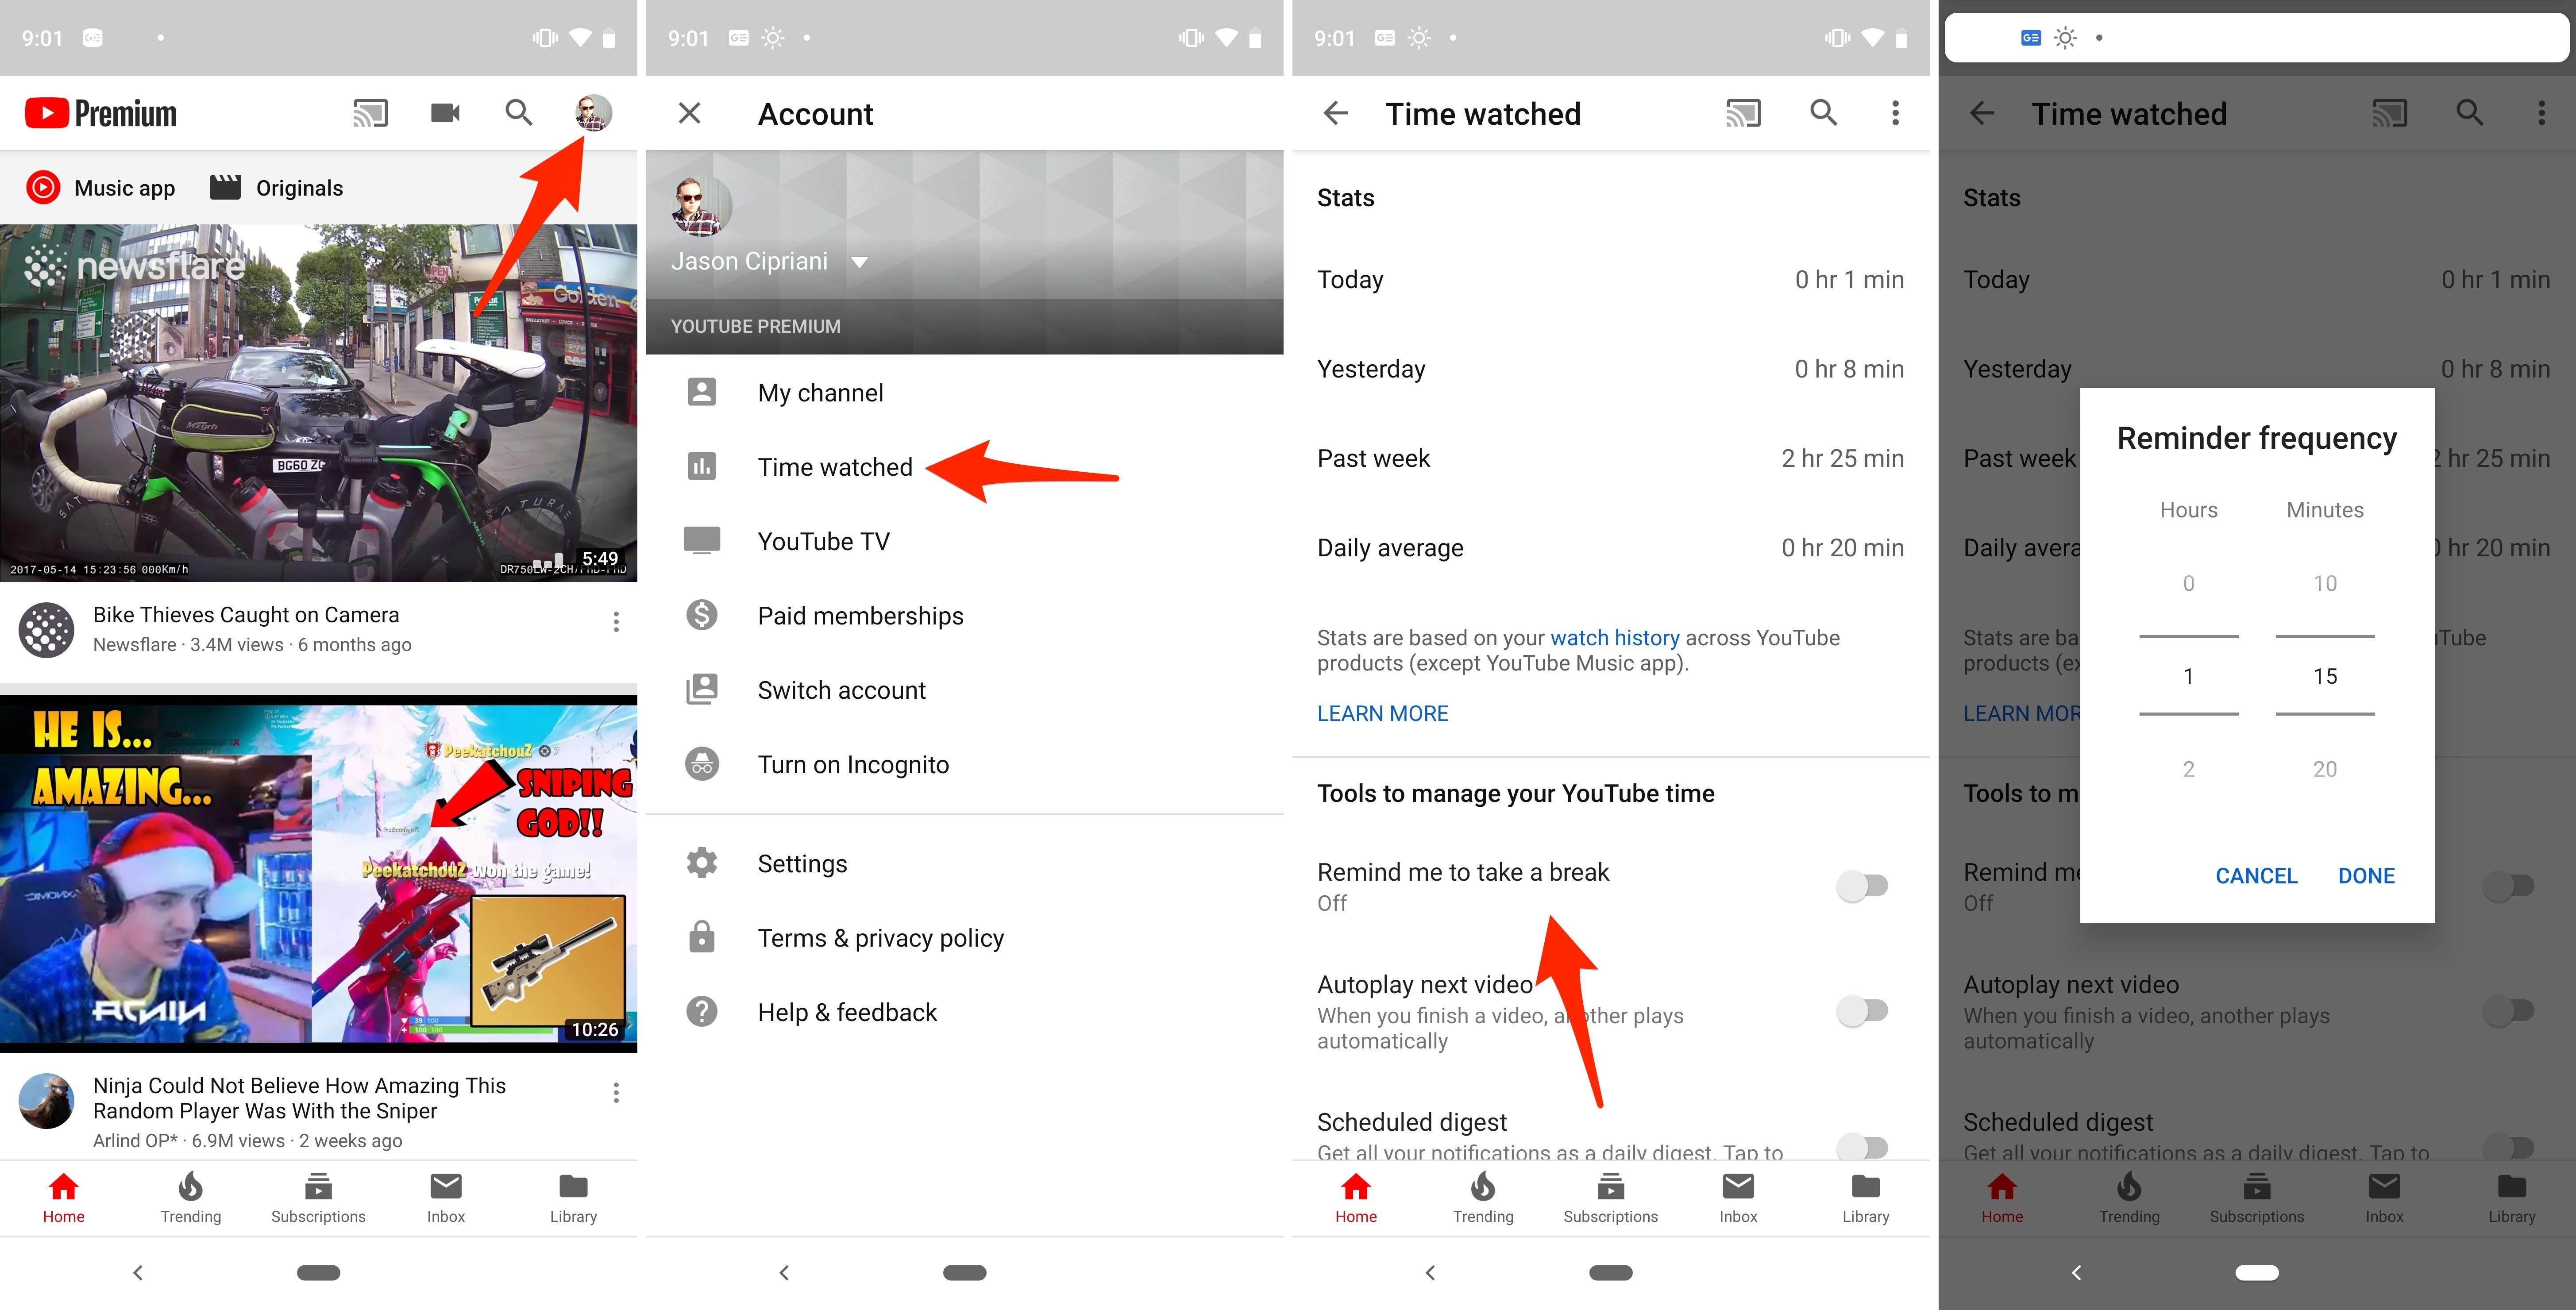 How to use YouTube’s Take a Break feature